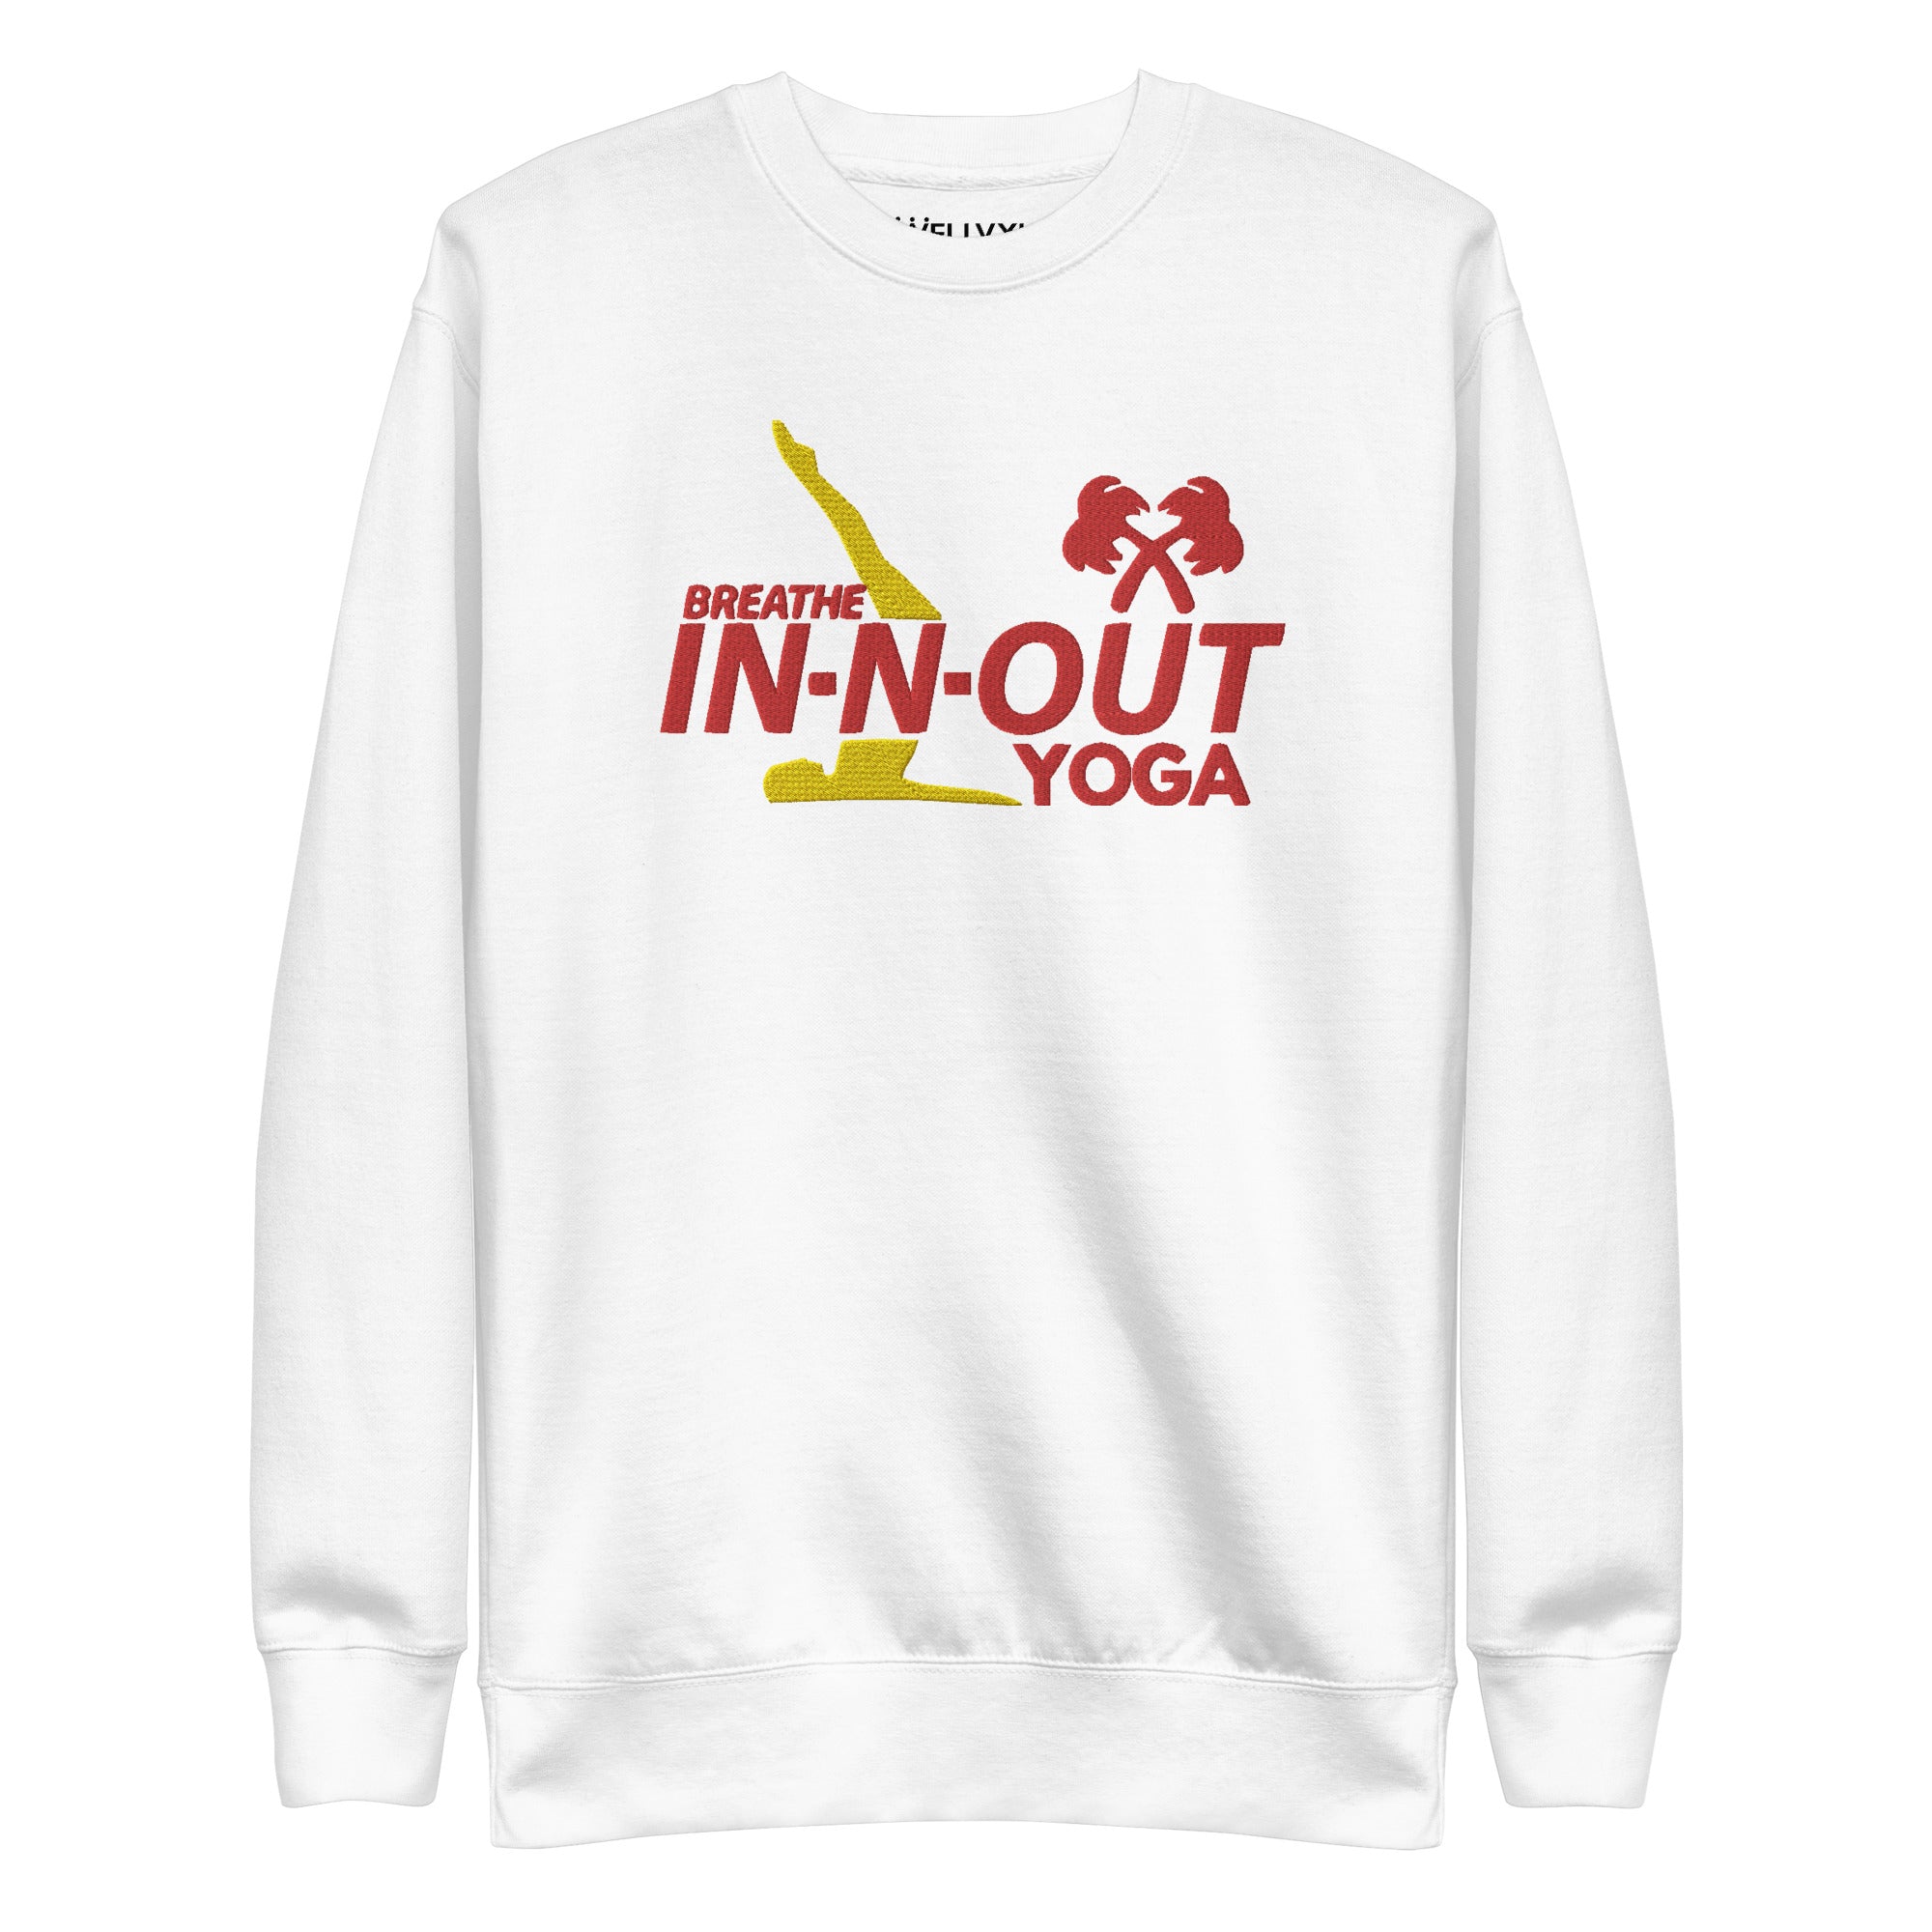 IN-N-OUT YOGA Embroidered Sweatshirt